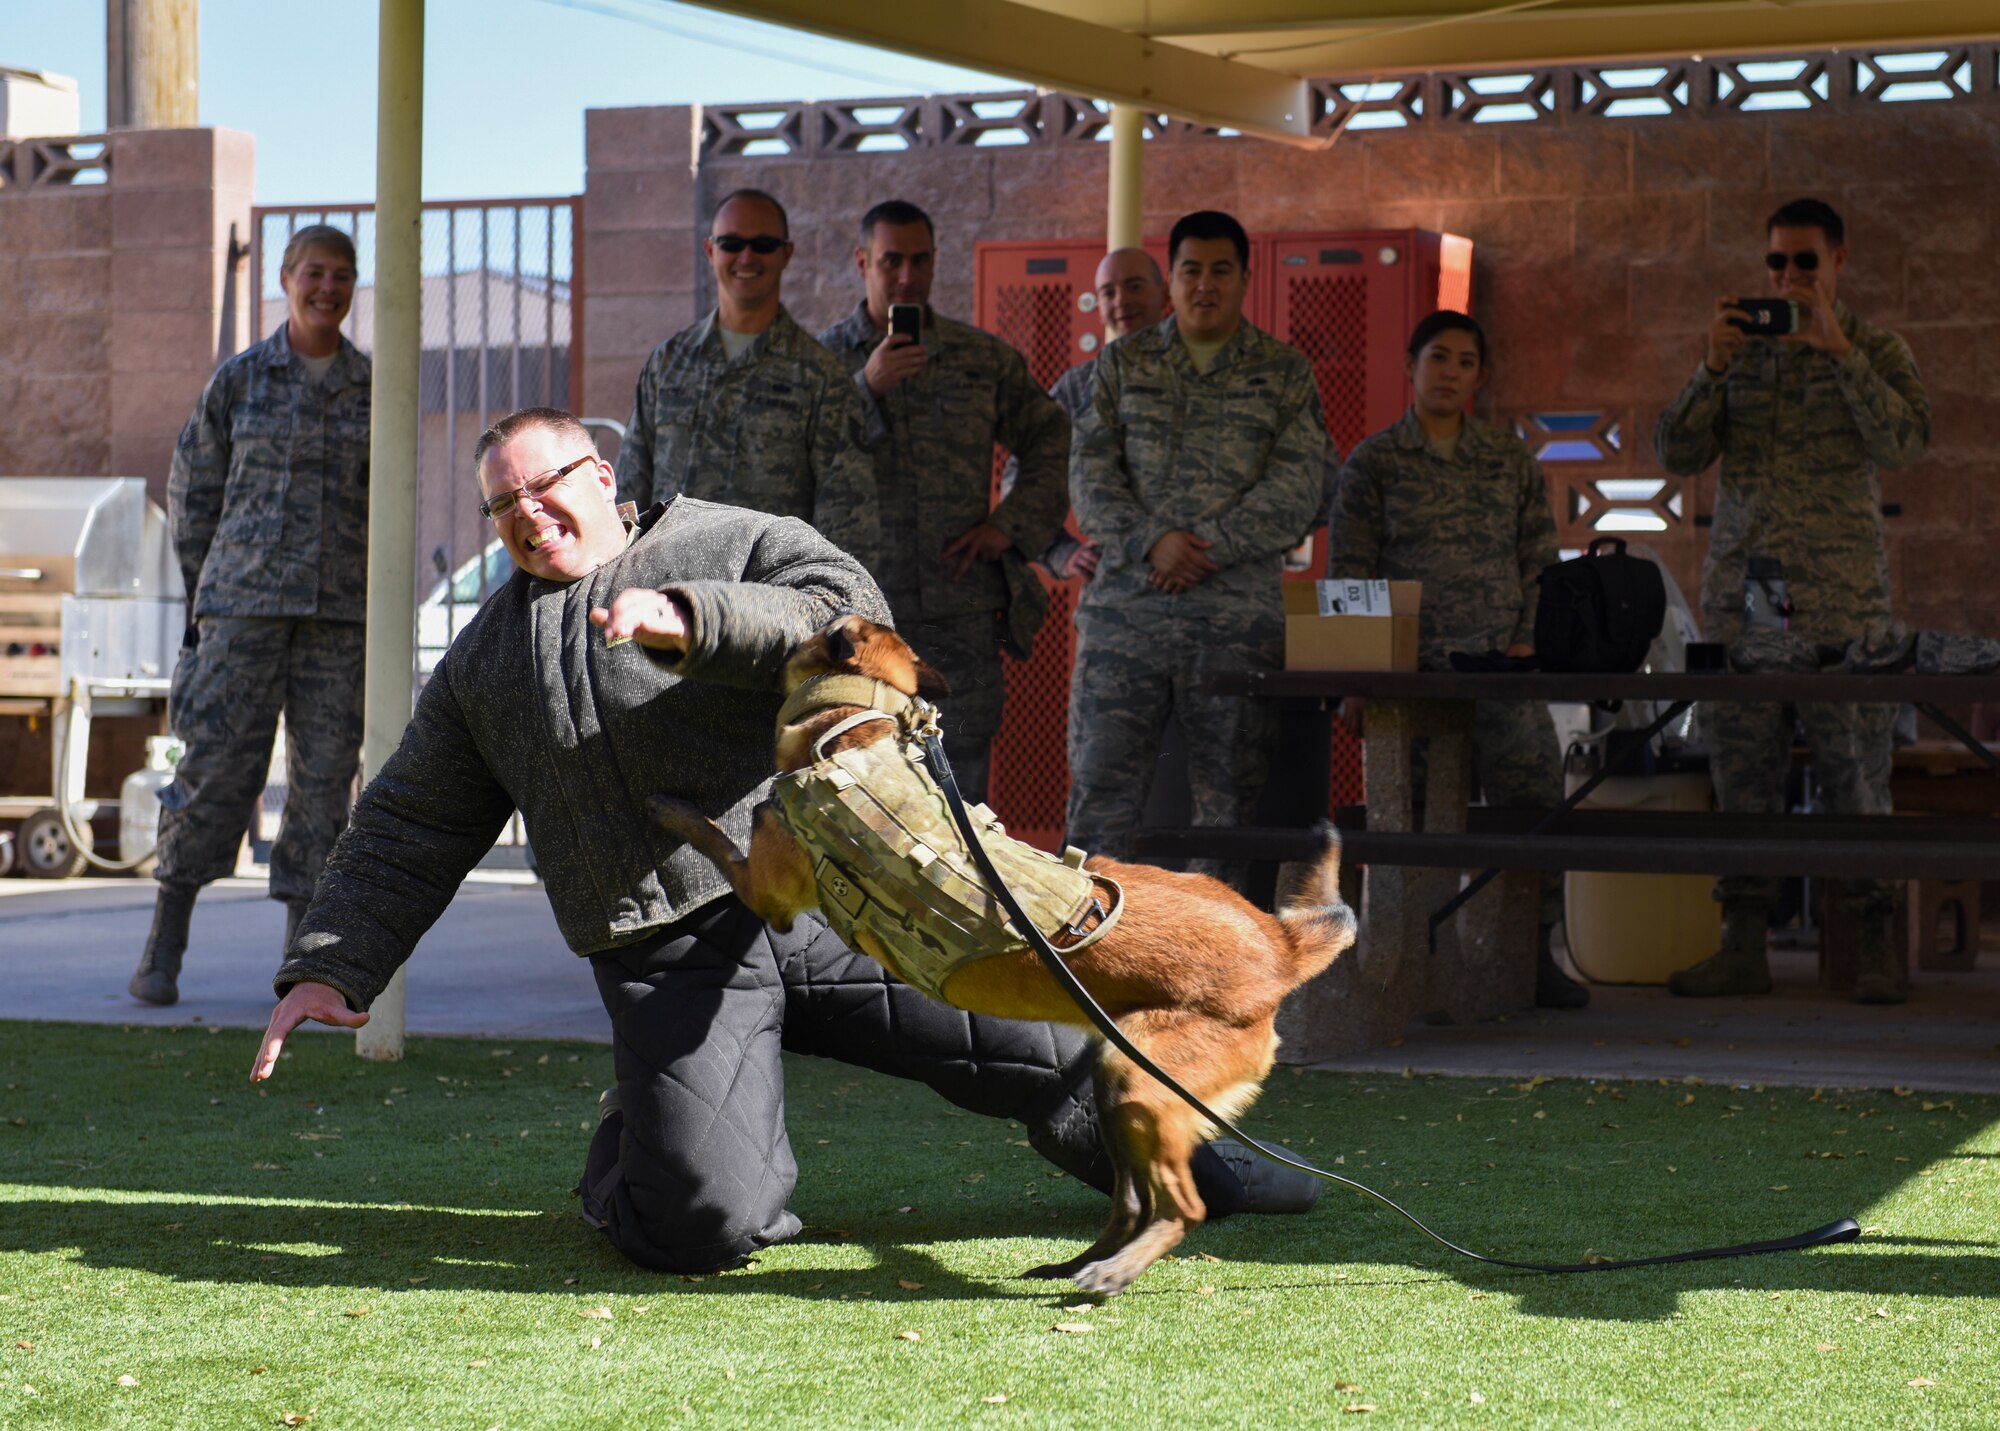 Airmen from units across the U.S. Air Force Warfare Center observe a K-9 display for the Warrior Stripe program at Nellis Air Force Base, Nevada, Aug. 16, 2018. The students were pulled from the Warfare Center and its supporting units. (U.S. Air Force photo by Airman 1st Class Andrew D. Sarver)